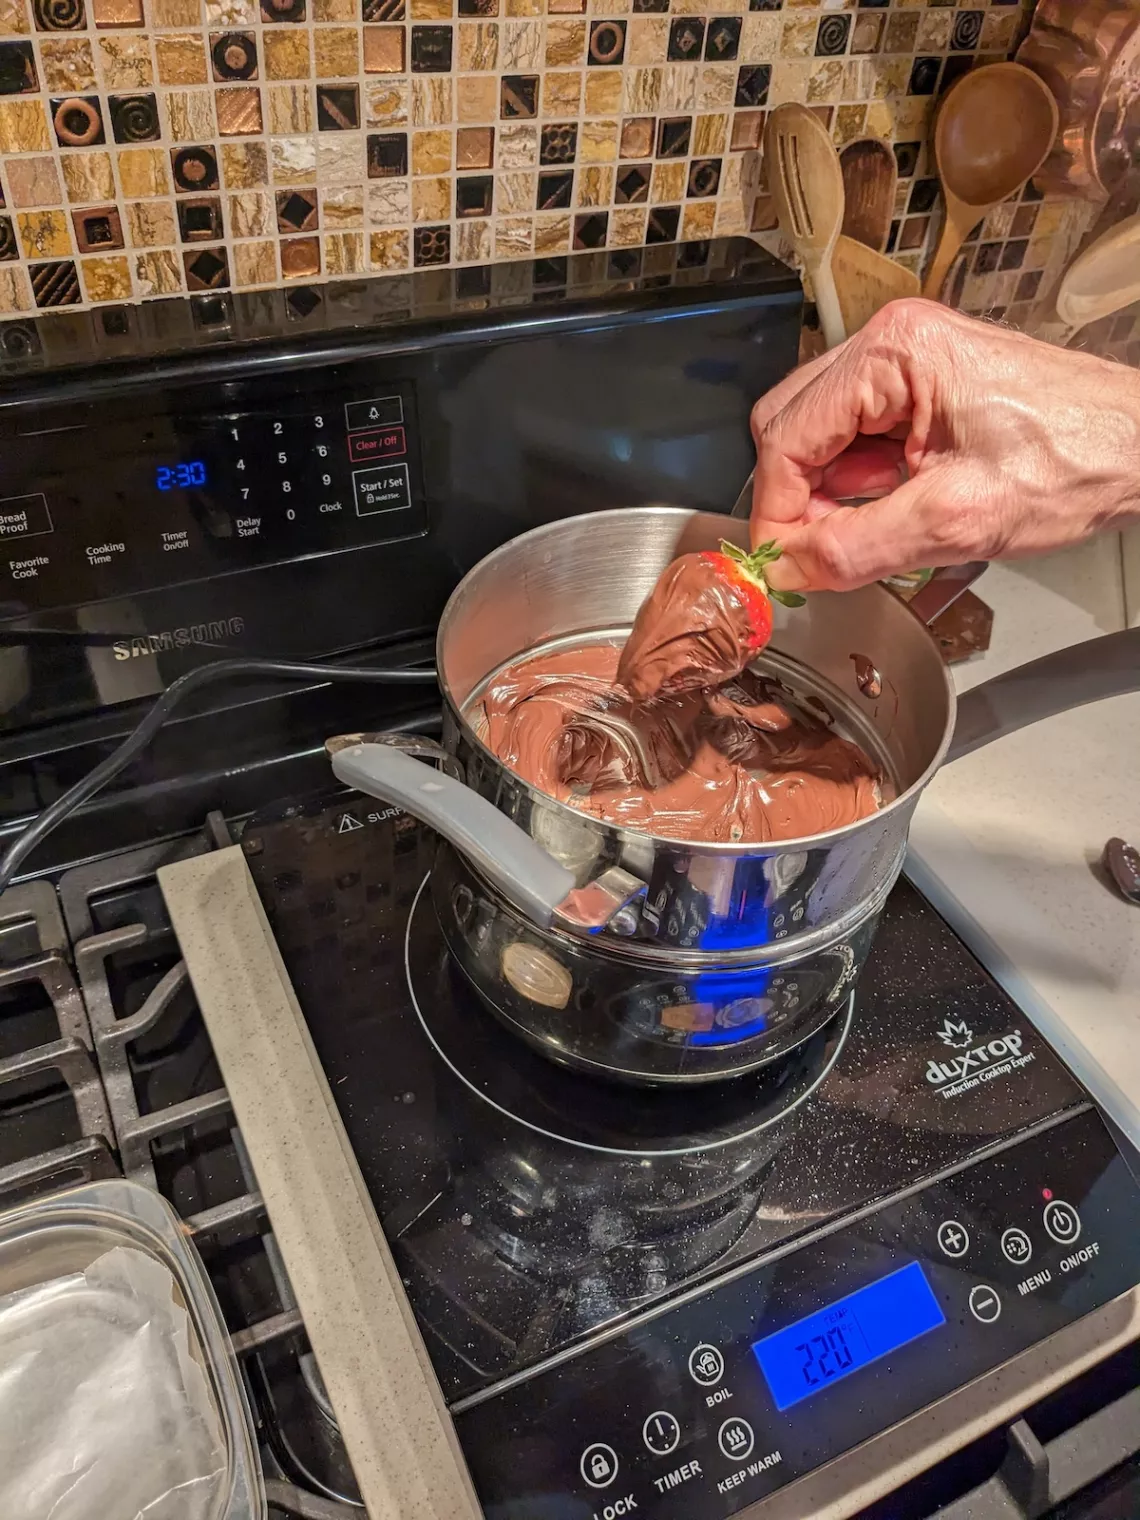 A hand dipping a strawberry into melted chocolate on a stove